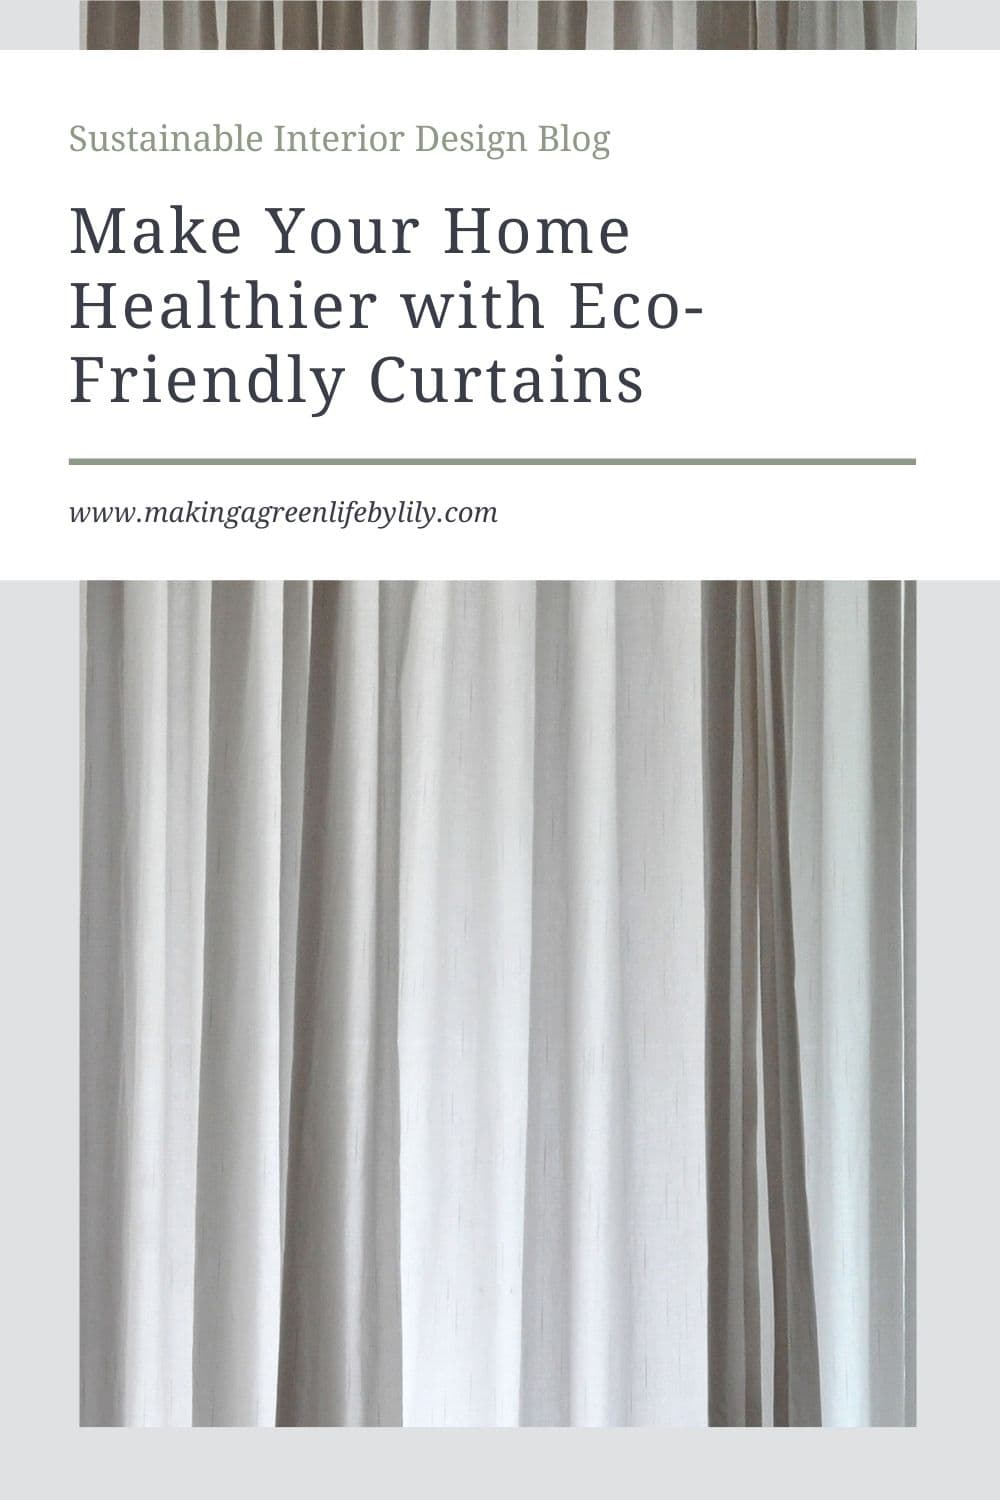 Make Your Home Healthier with Eco-Friendly Curtains 